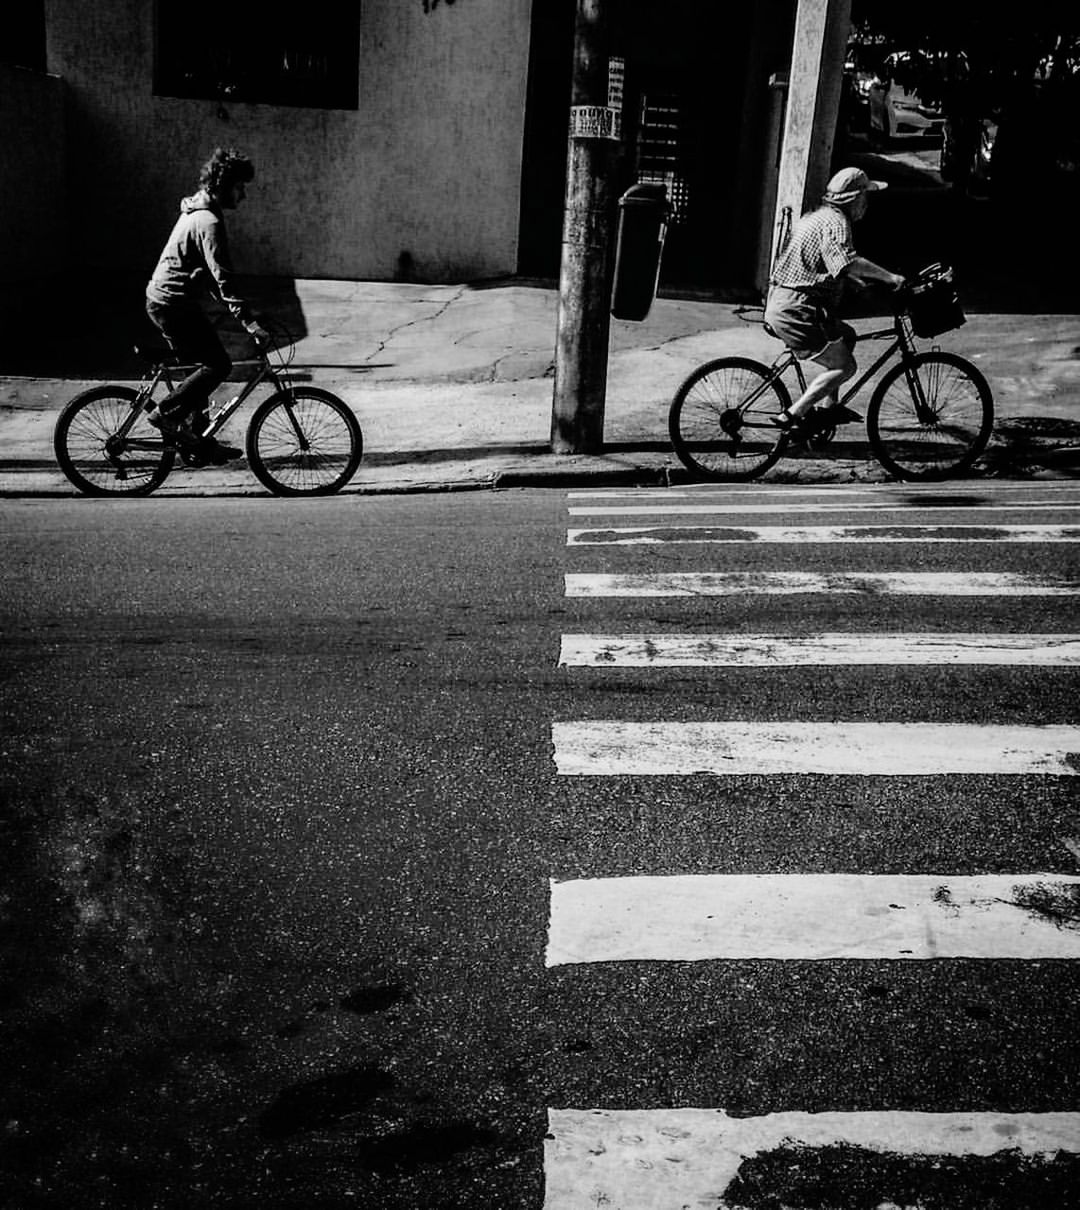 transportation, bicycle, land vehicle, ride, riding, city, mode of transportation, architecture, full length, zebra crossing, road, crosswalk, real people, men, street, crossing, road marking, day, symbol, sport